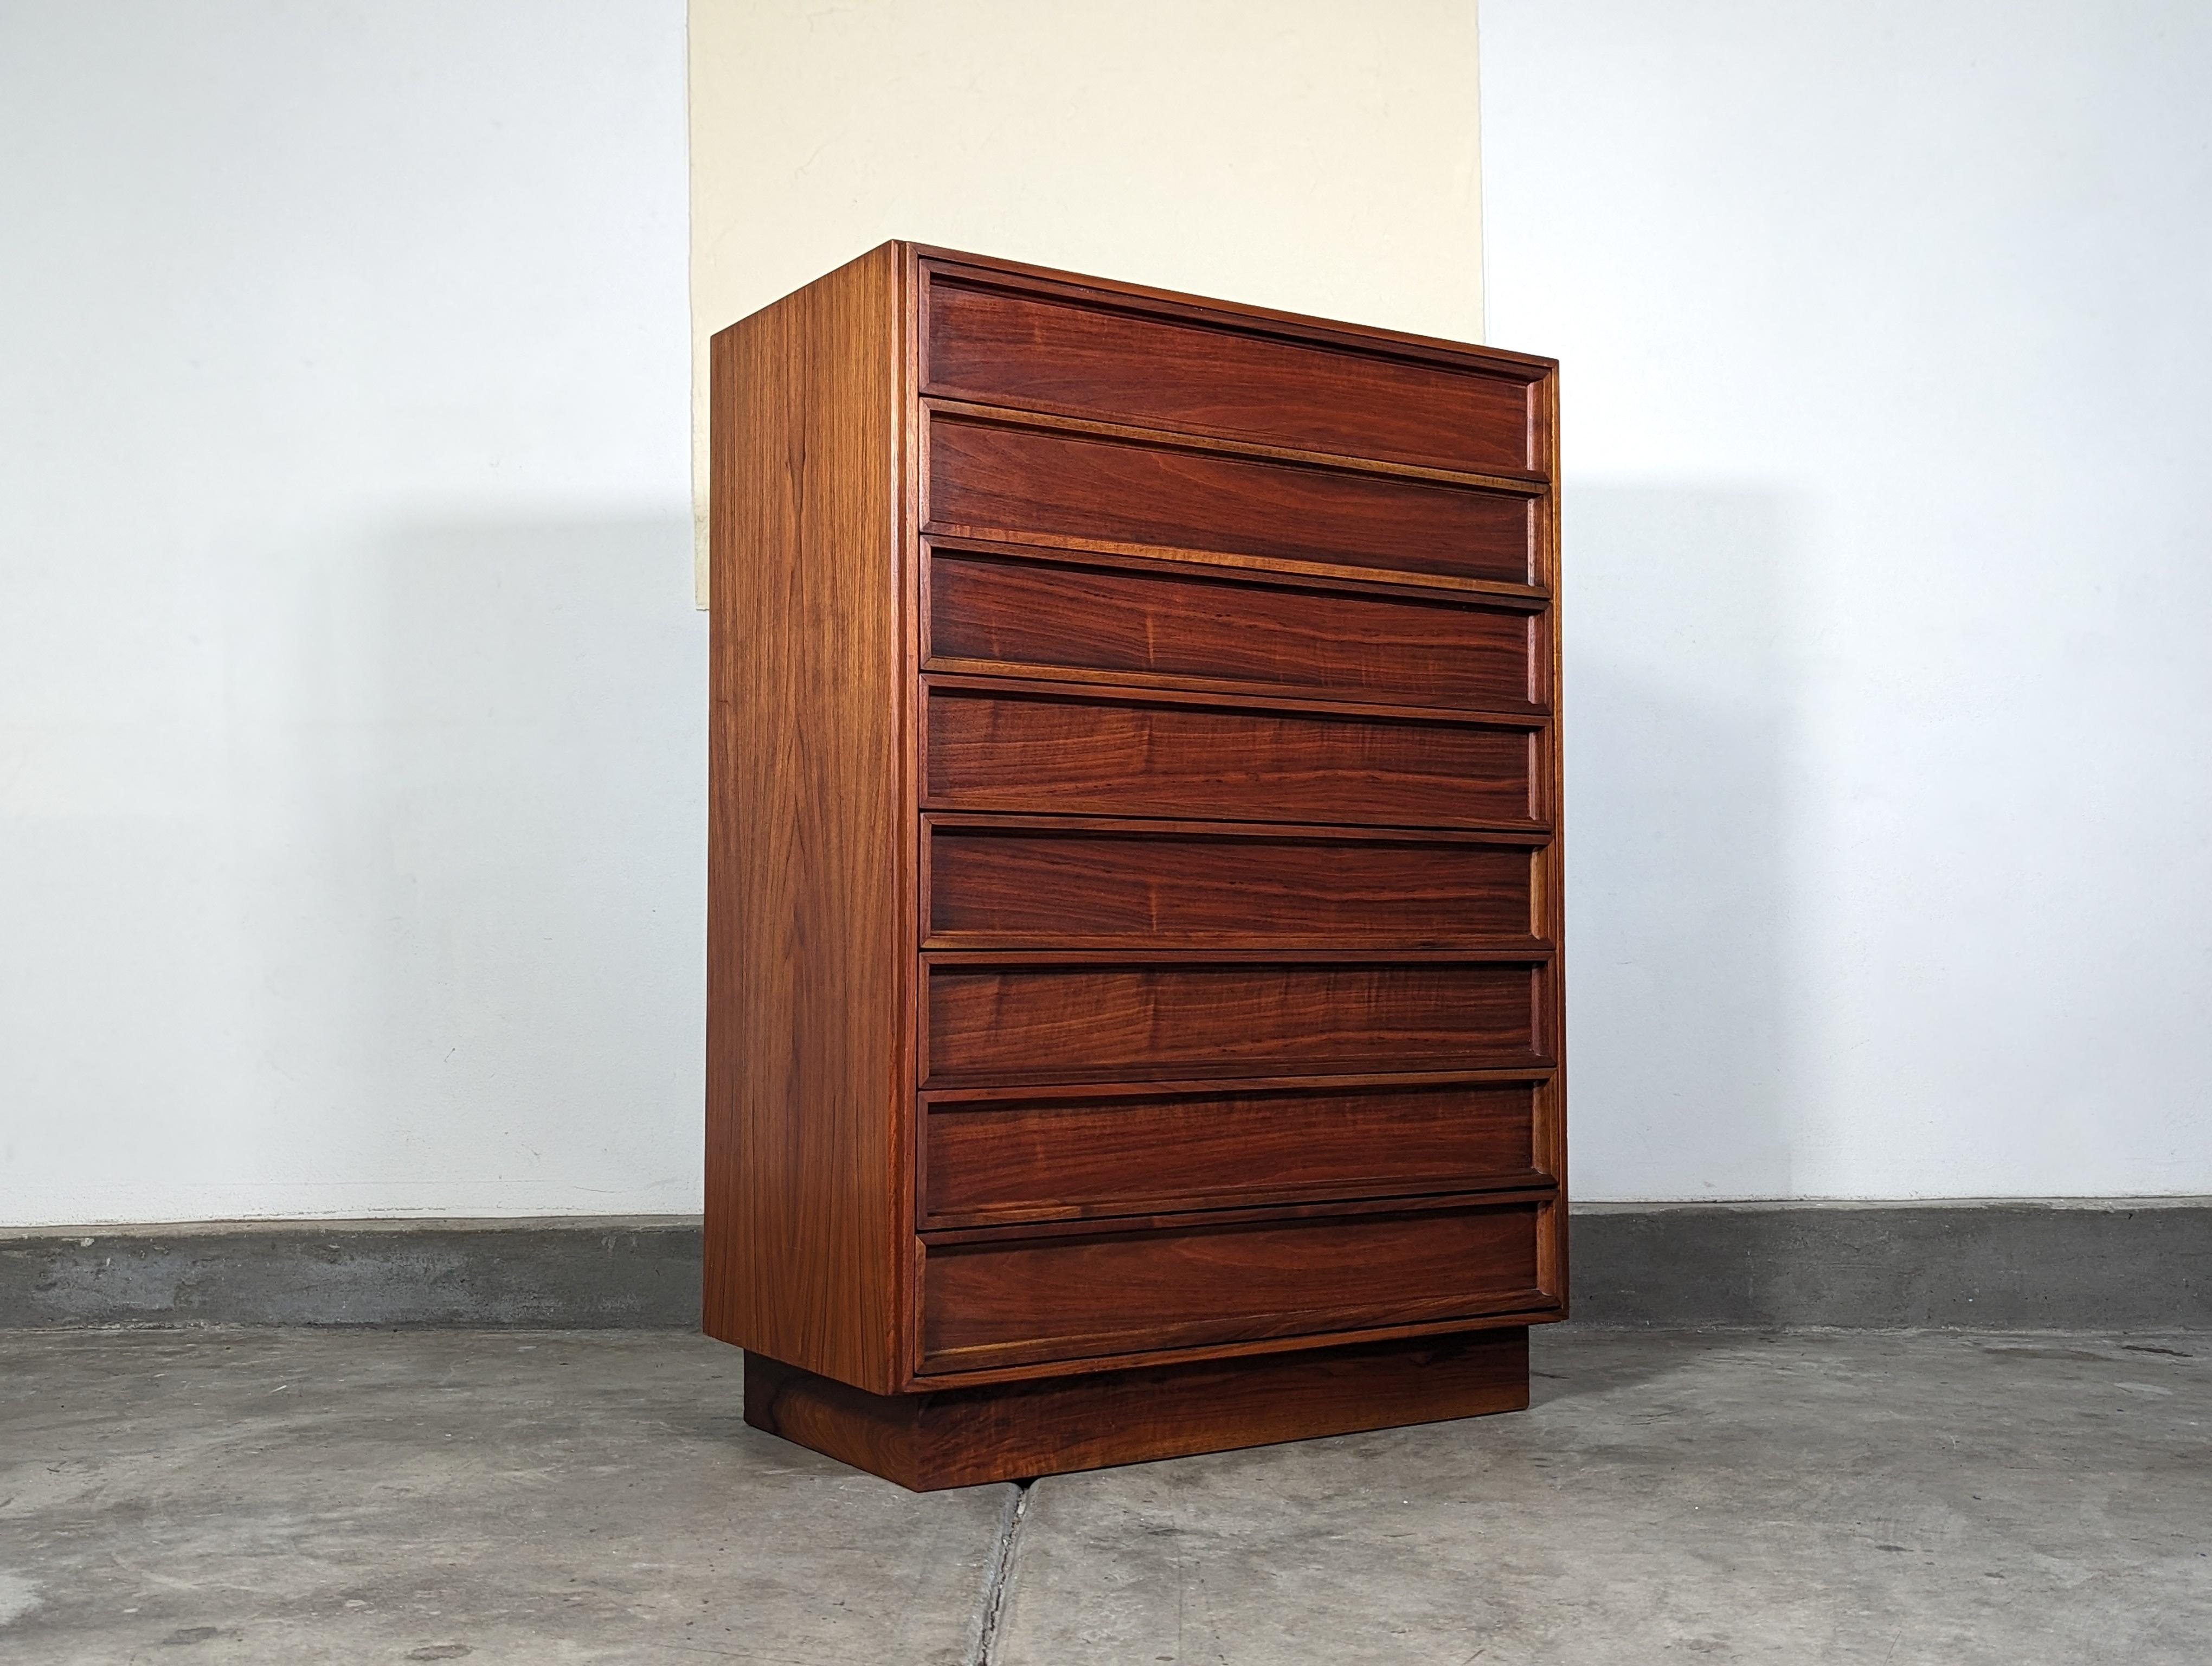 Introducing a distinguished piece of mid-century modern artistry, this vintage tallboy dresser by John Keal for Brown Saltman defines the iconic 1960s style with its sleek design and timeless appeal. Measuring 36